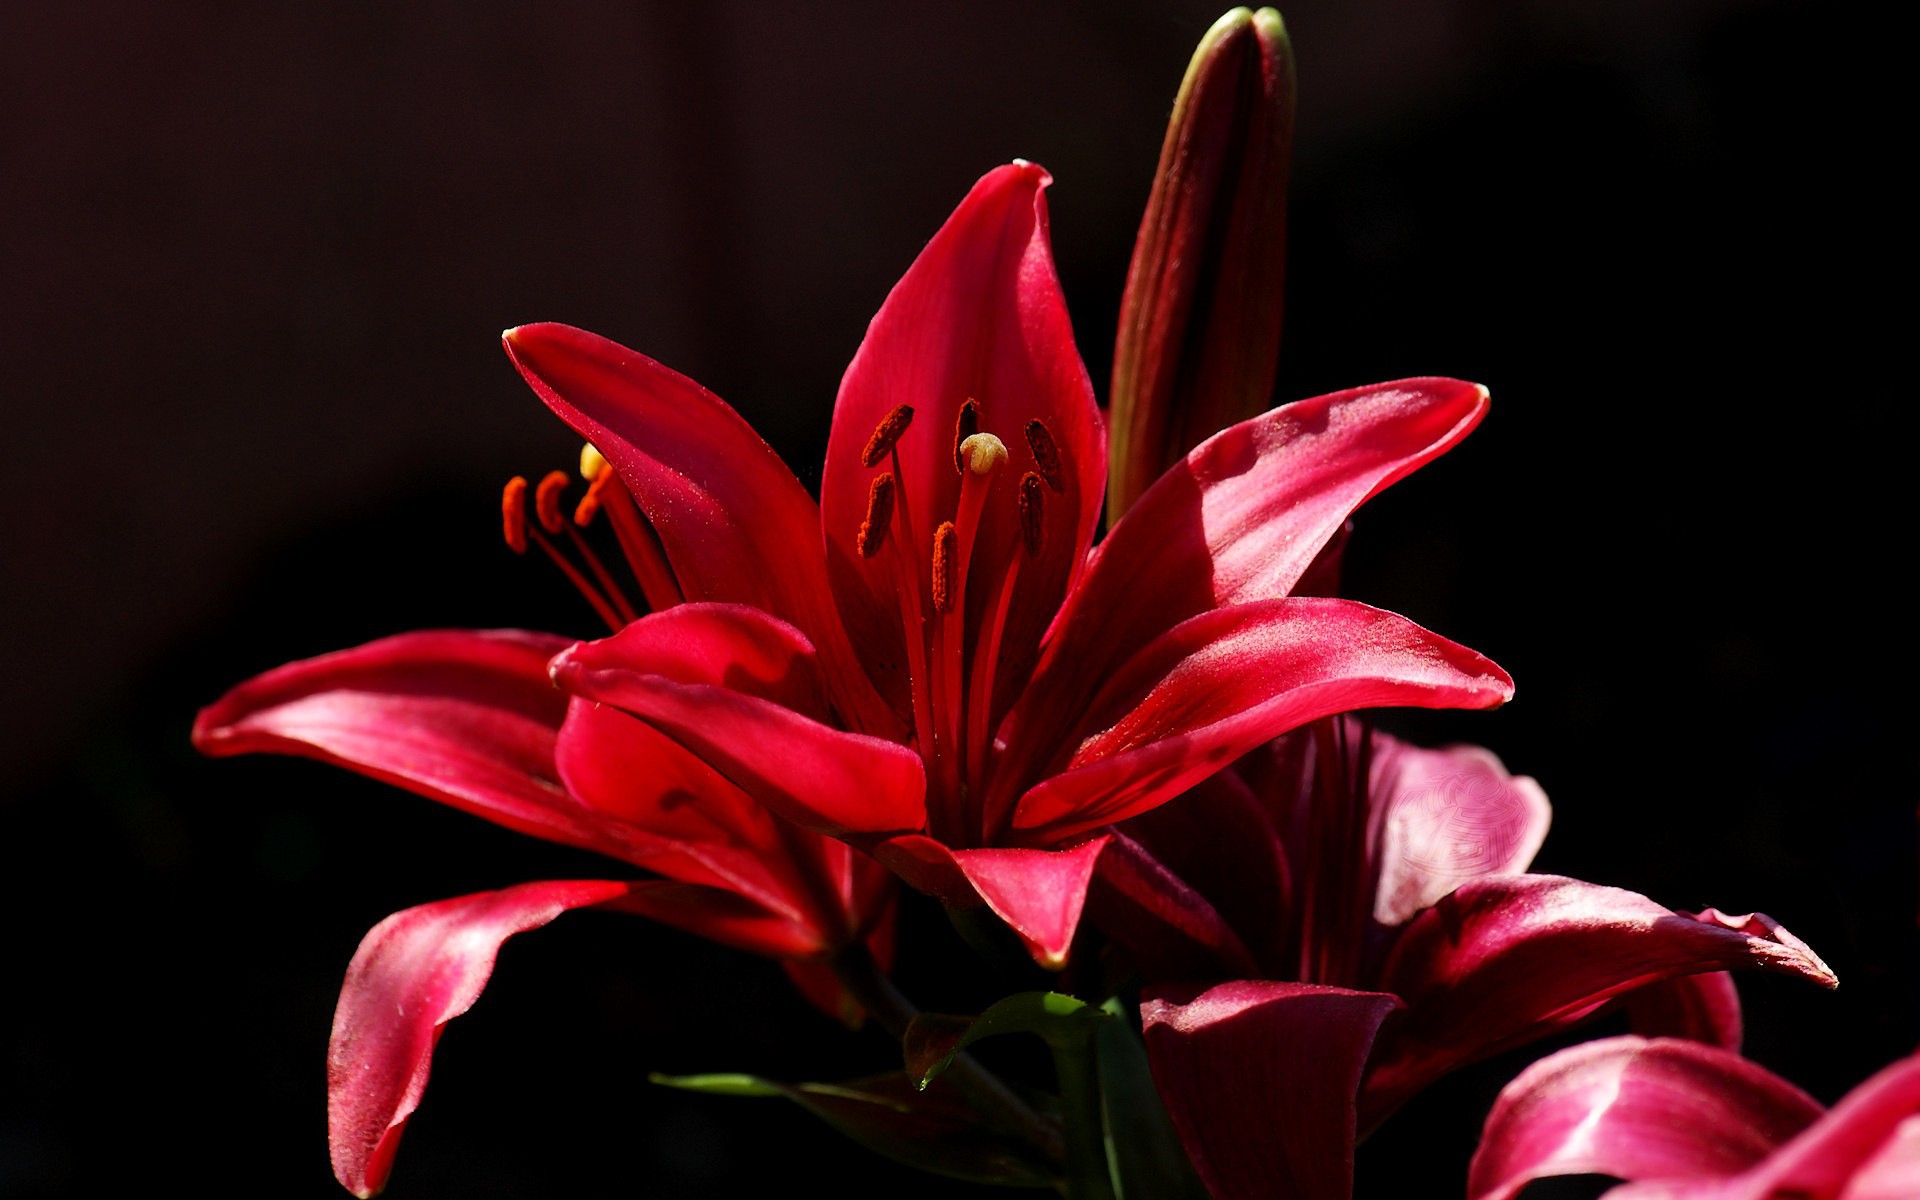 Red Flower On A Black Background Wallpaper And Image